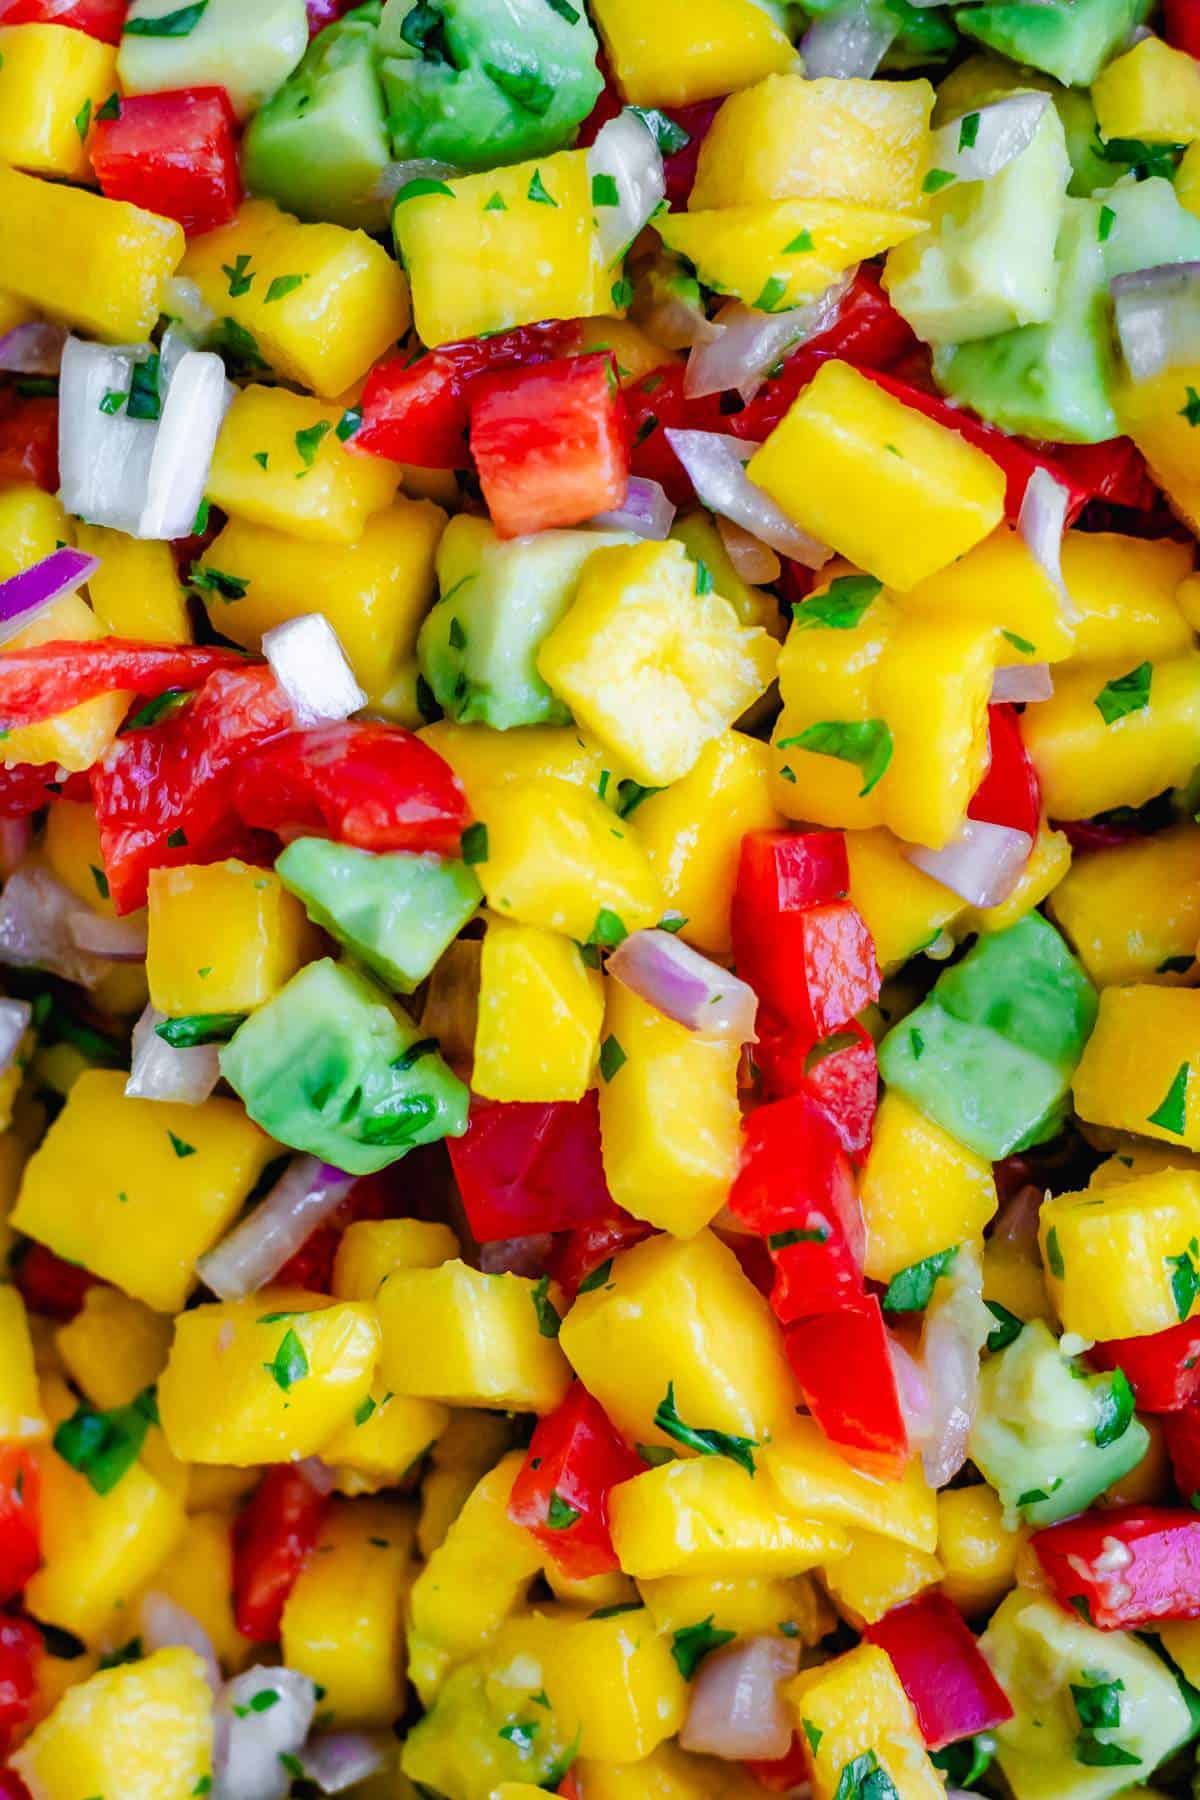 Diced mangoes, avocados, bell peppers, and onions for salsa, up close.